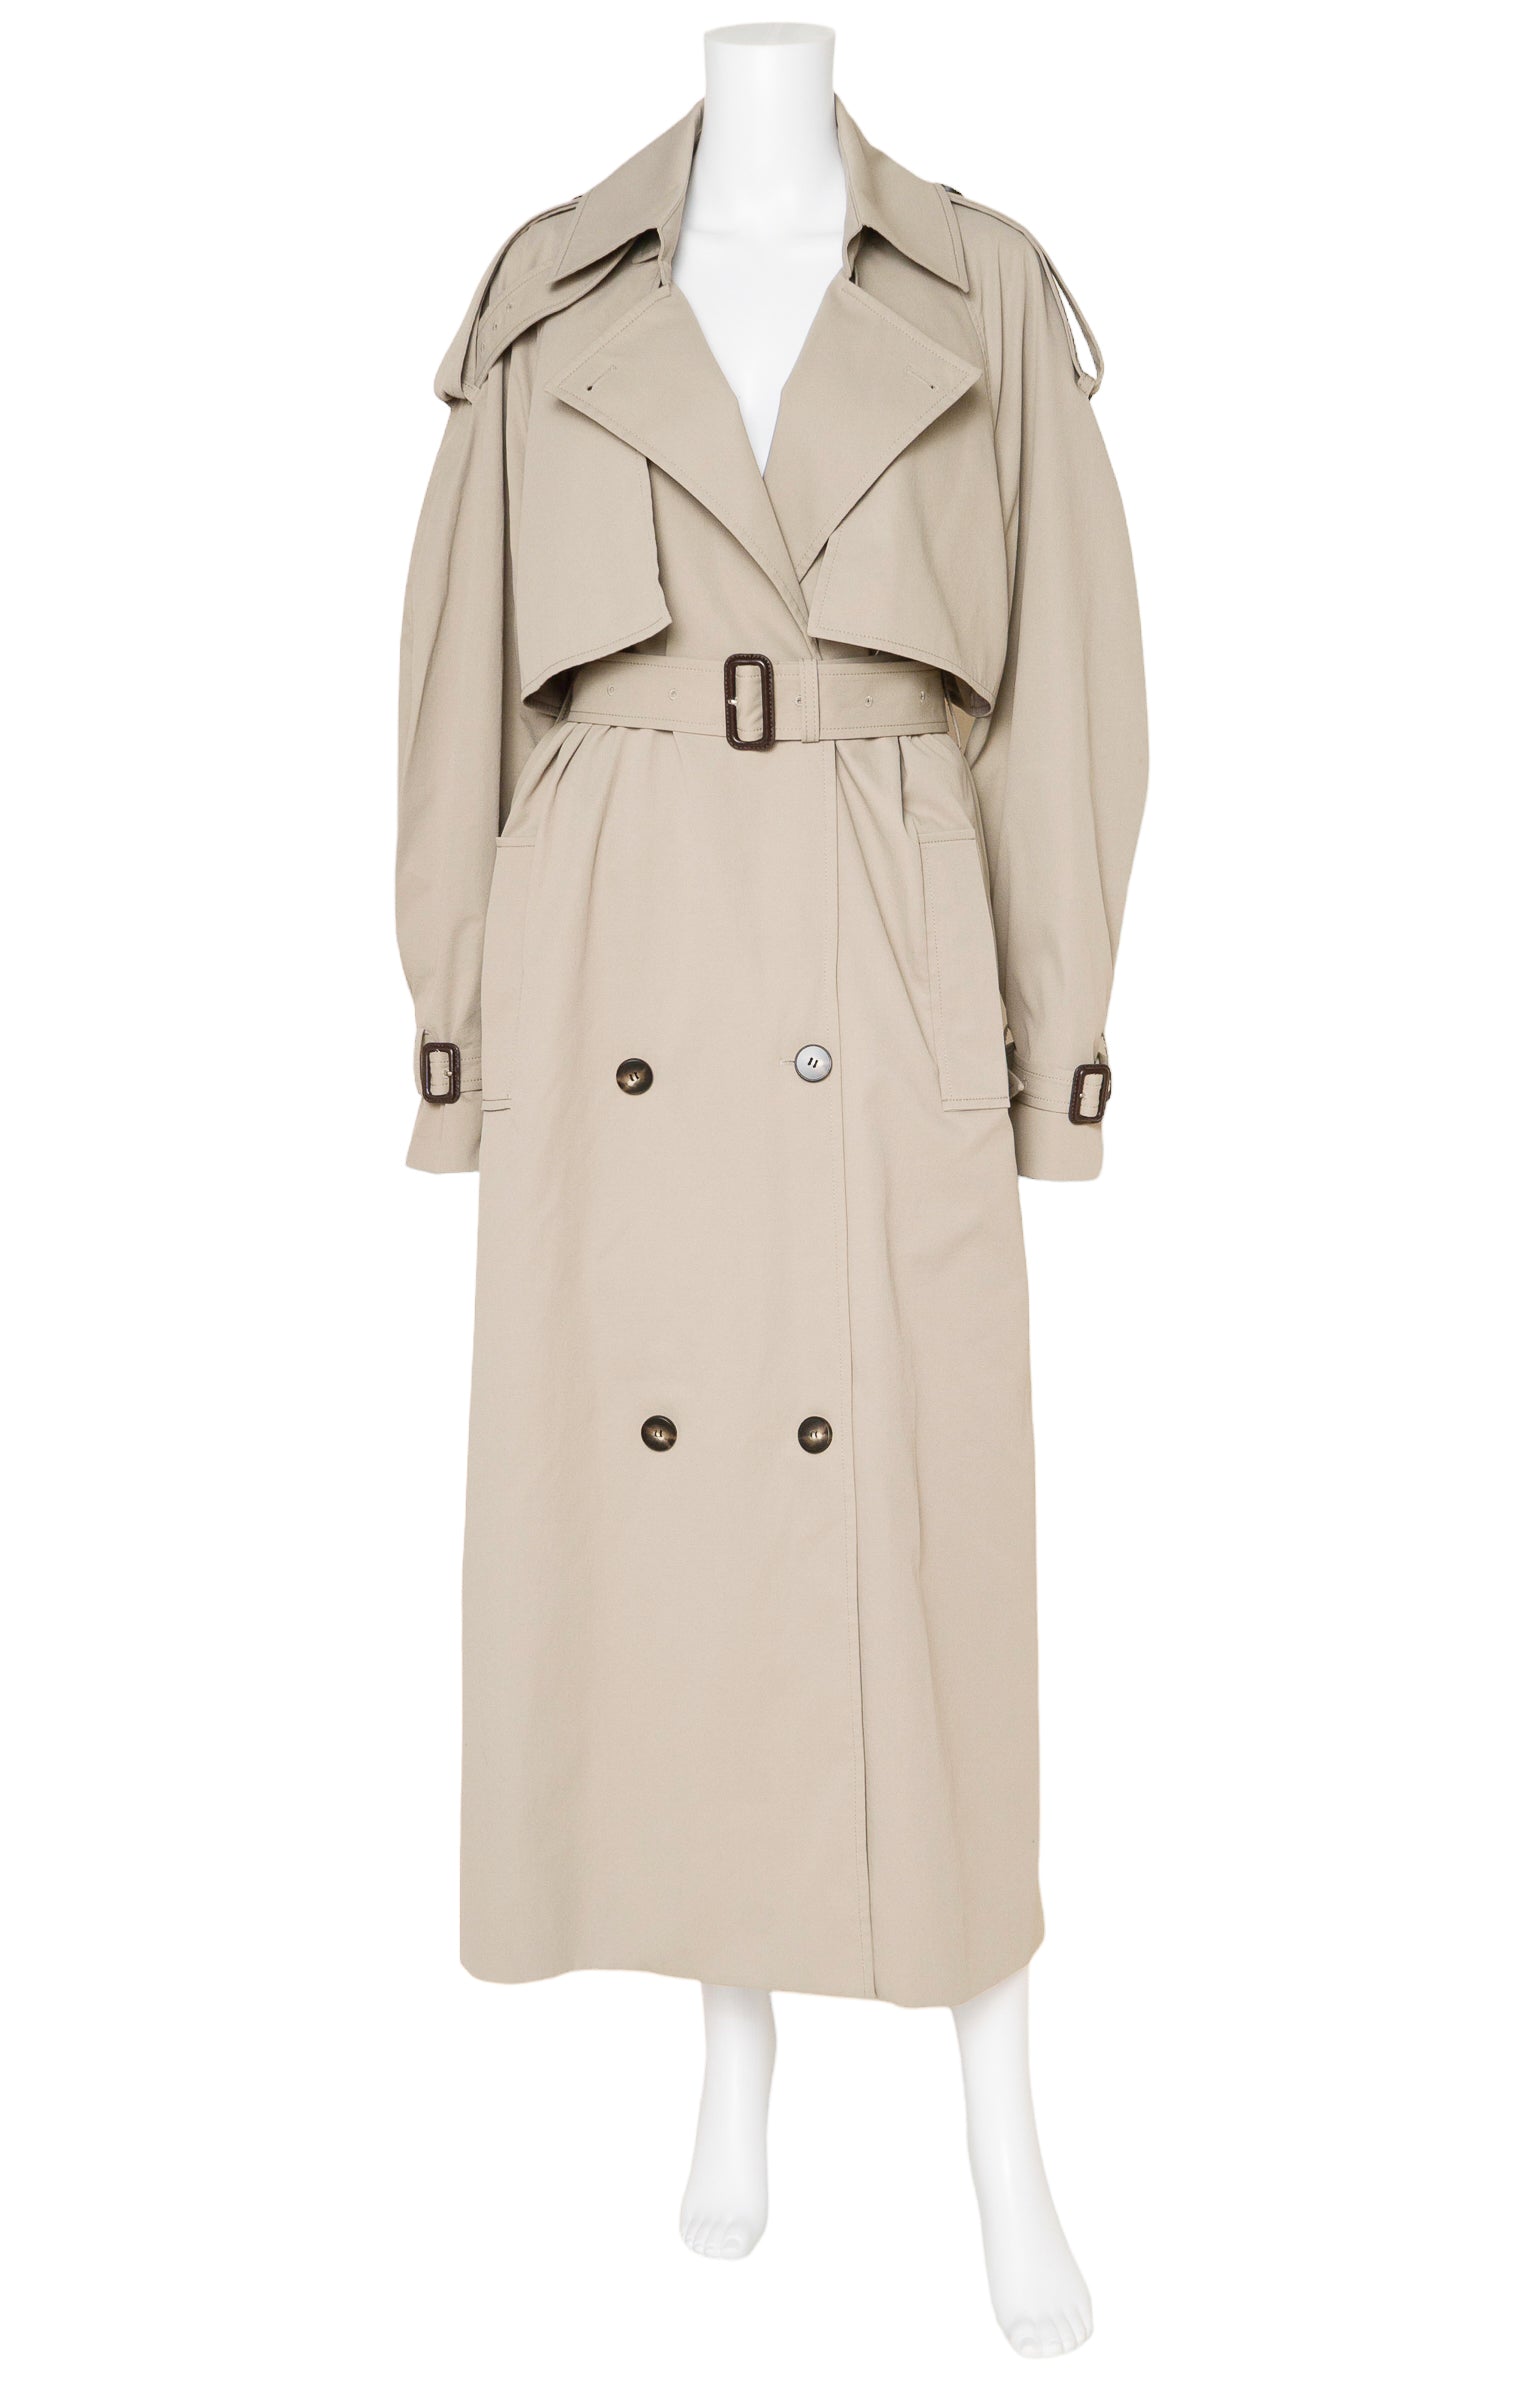 CAMILLA AND MARC (RARE) Coat Size: No size tags, fits like OSFM